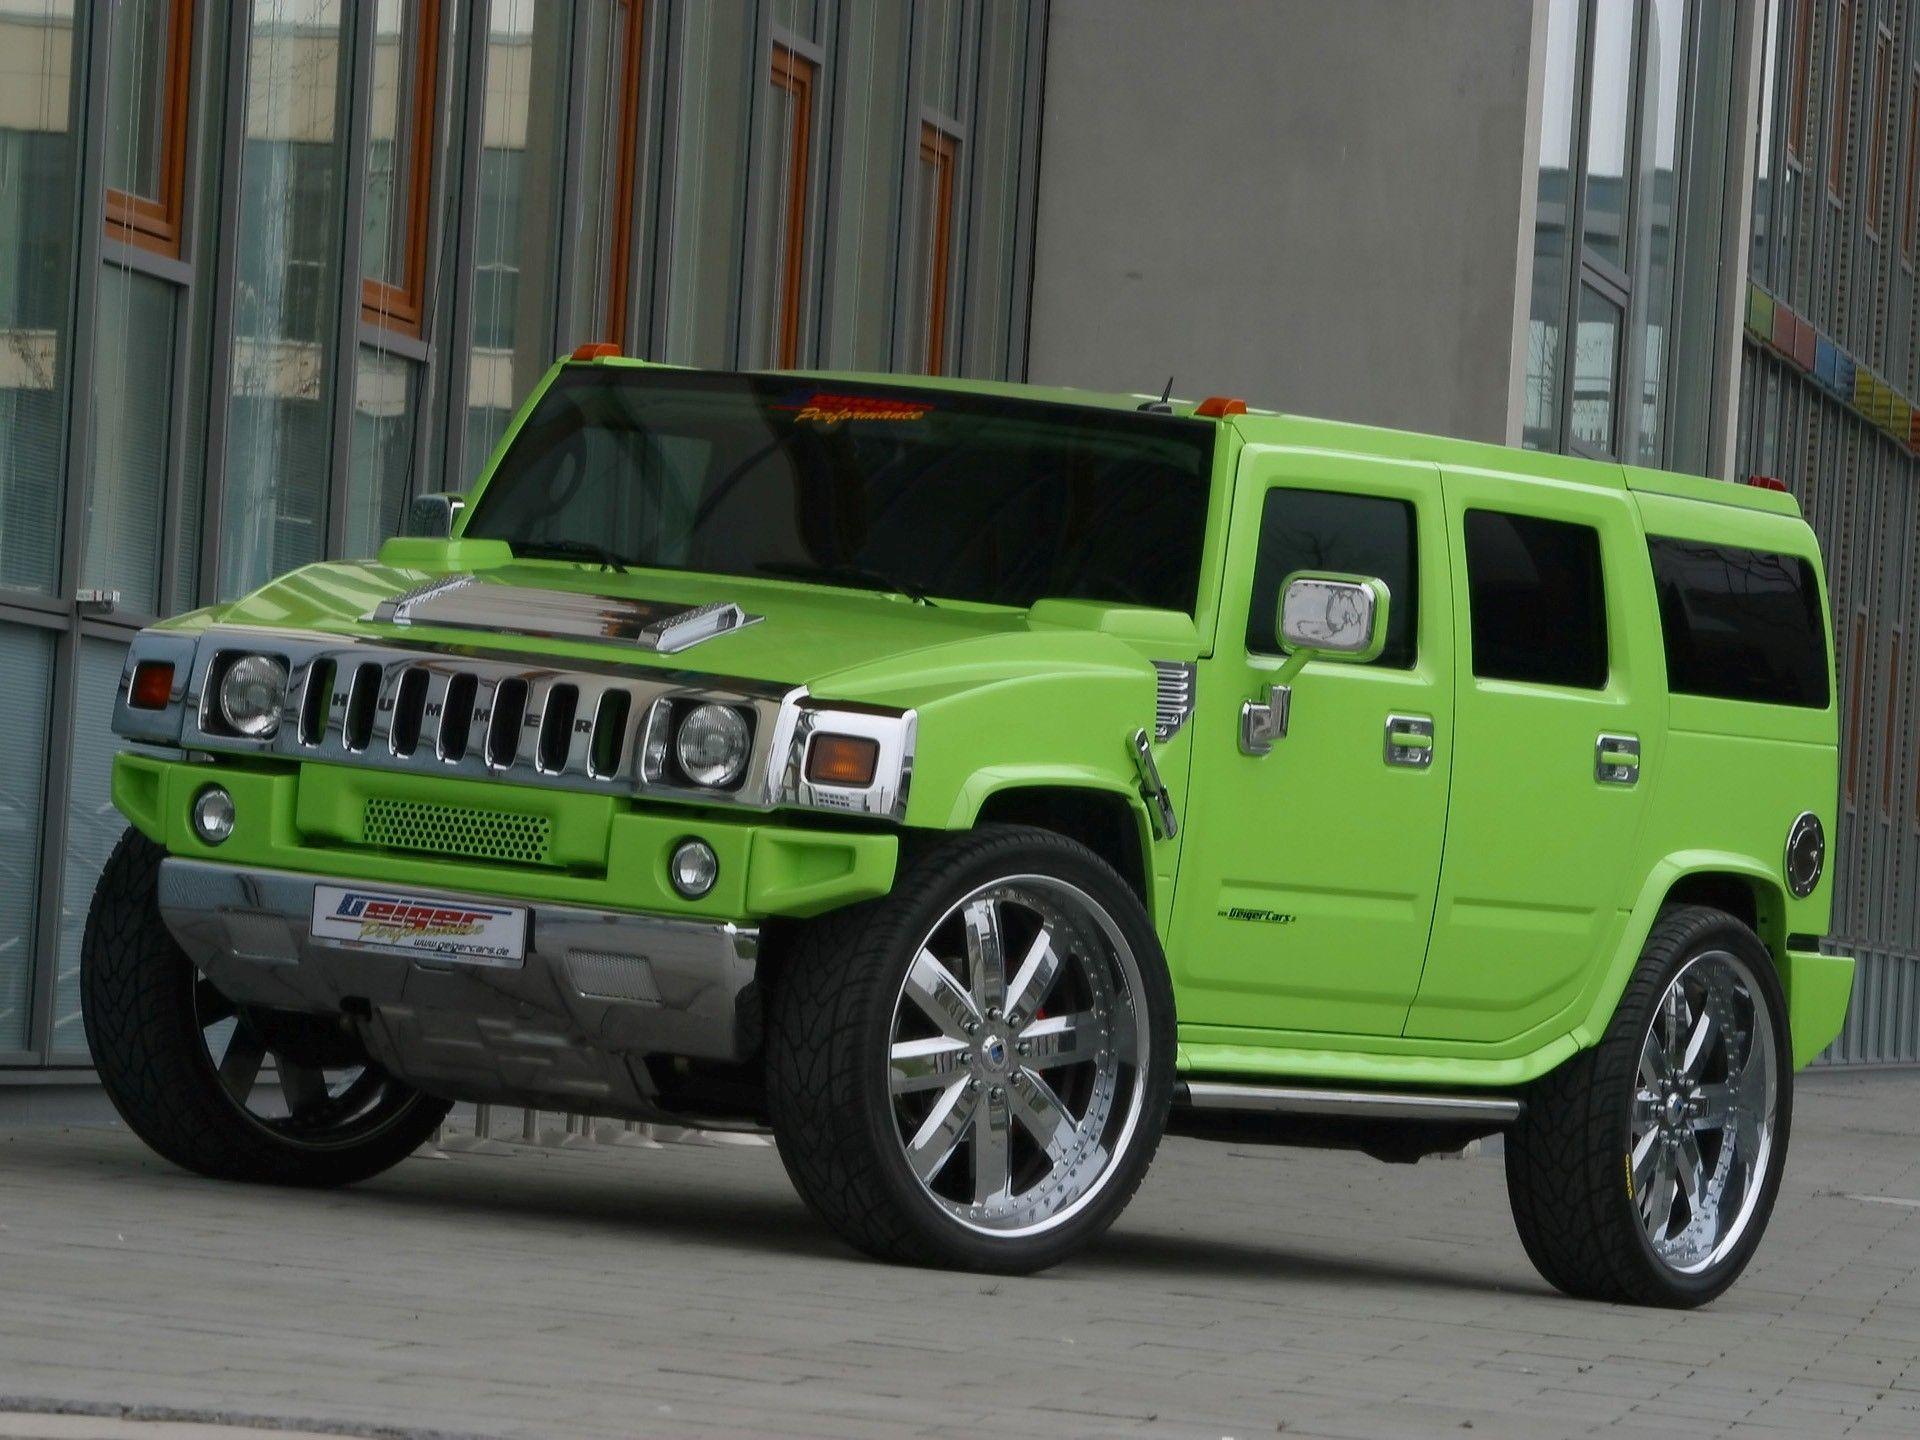 Hummer Wallpapers HD  Download Hummer Cars Wallpapers  DriveSpark